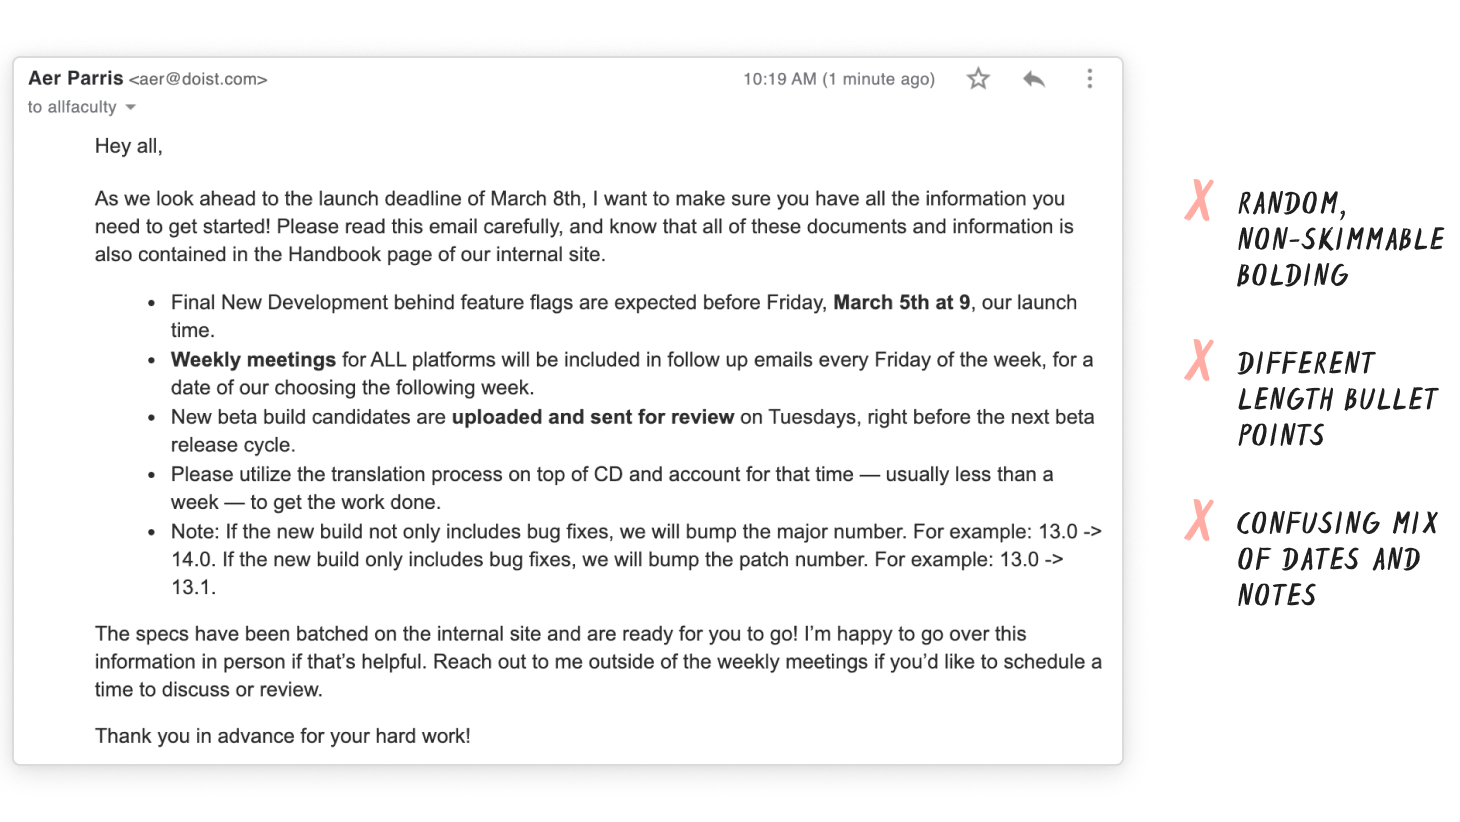 An example poorly written email for a product launch is shown, with 3 annotations: Random, non-skimmable bolding, different length bullet points, and confusing mix of dates and notes. End description. 